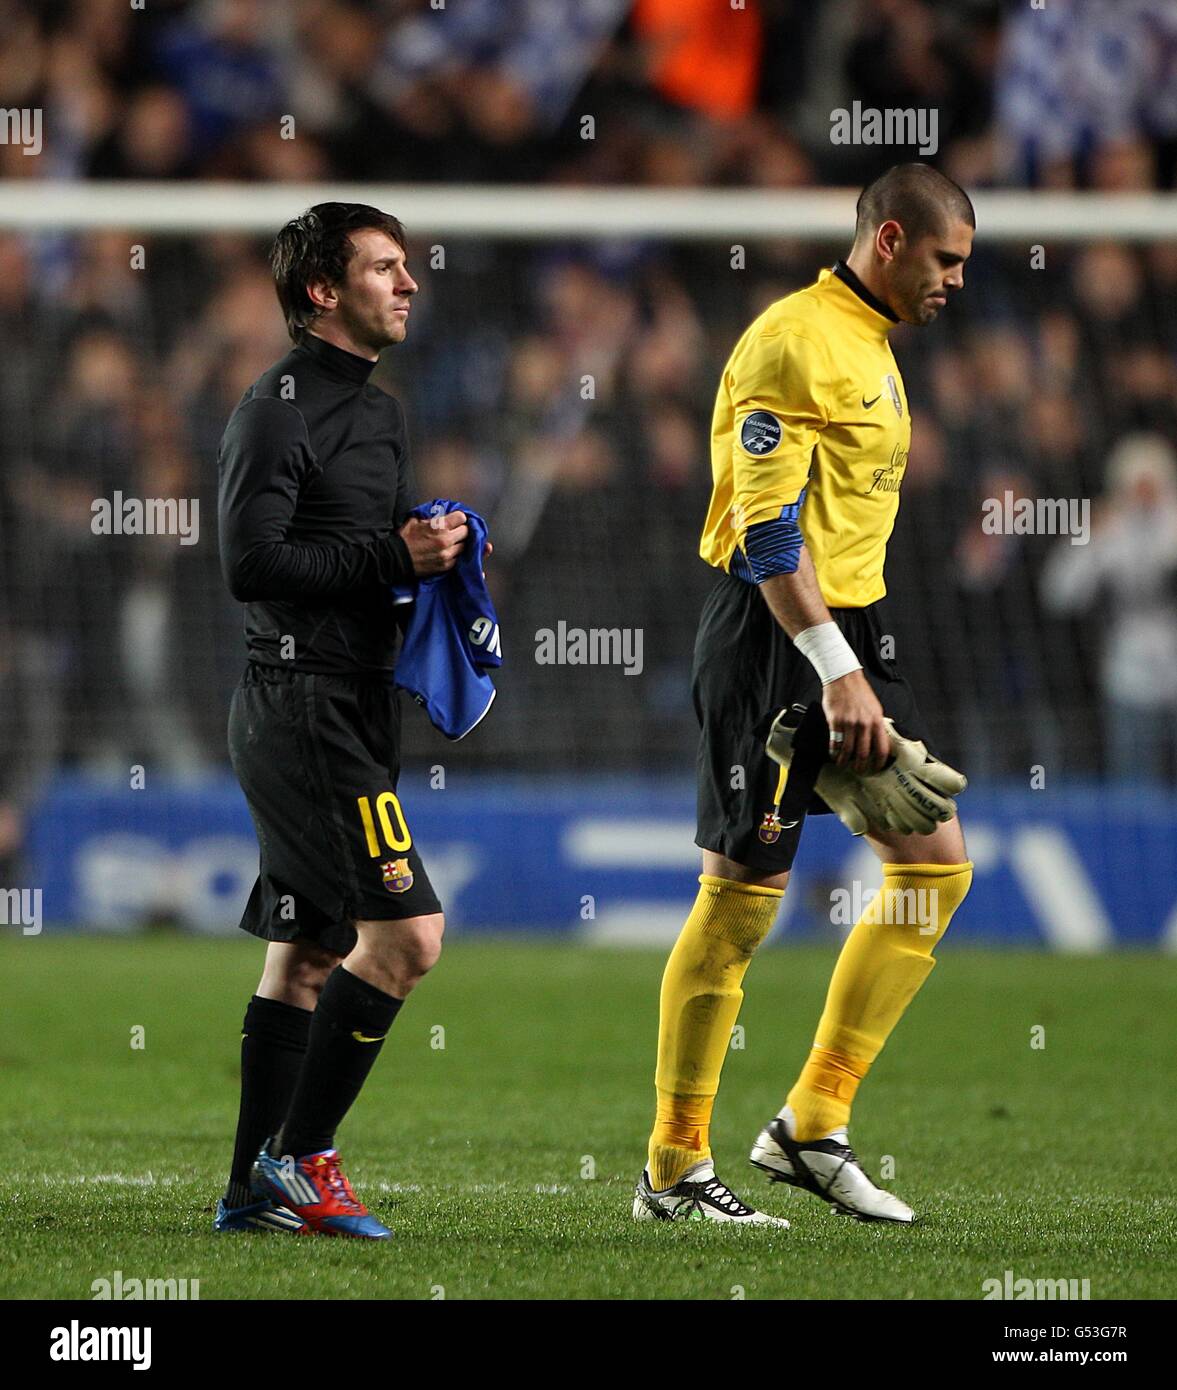 Barcelona's Lionel Messi (left) and Barcelona goalkeeper Victor Valdes looks dejected after the game Stock Photo